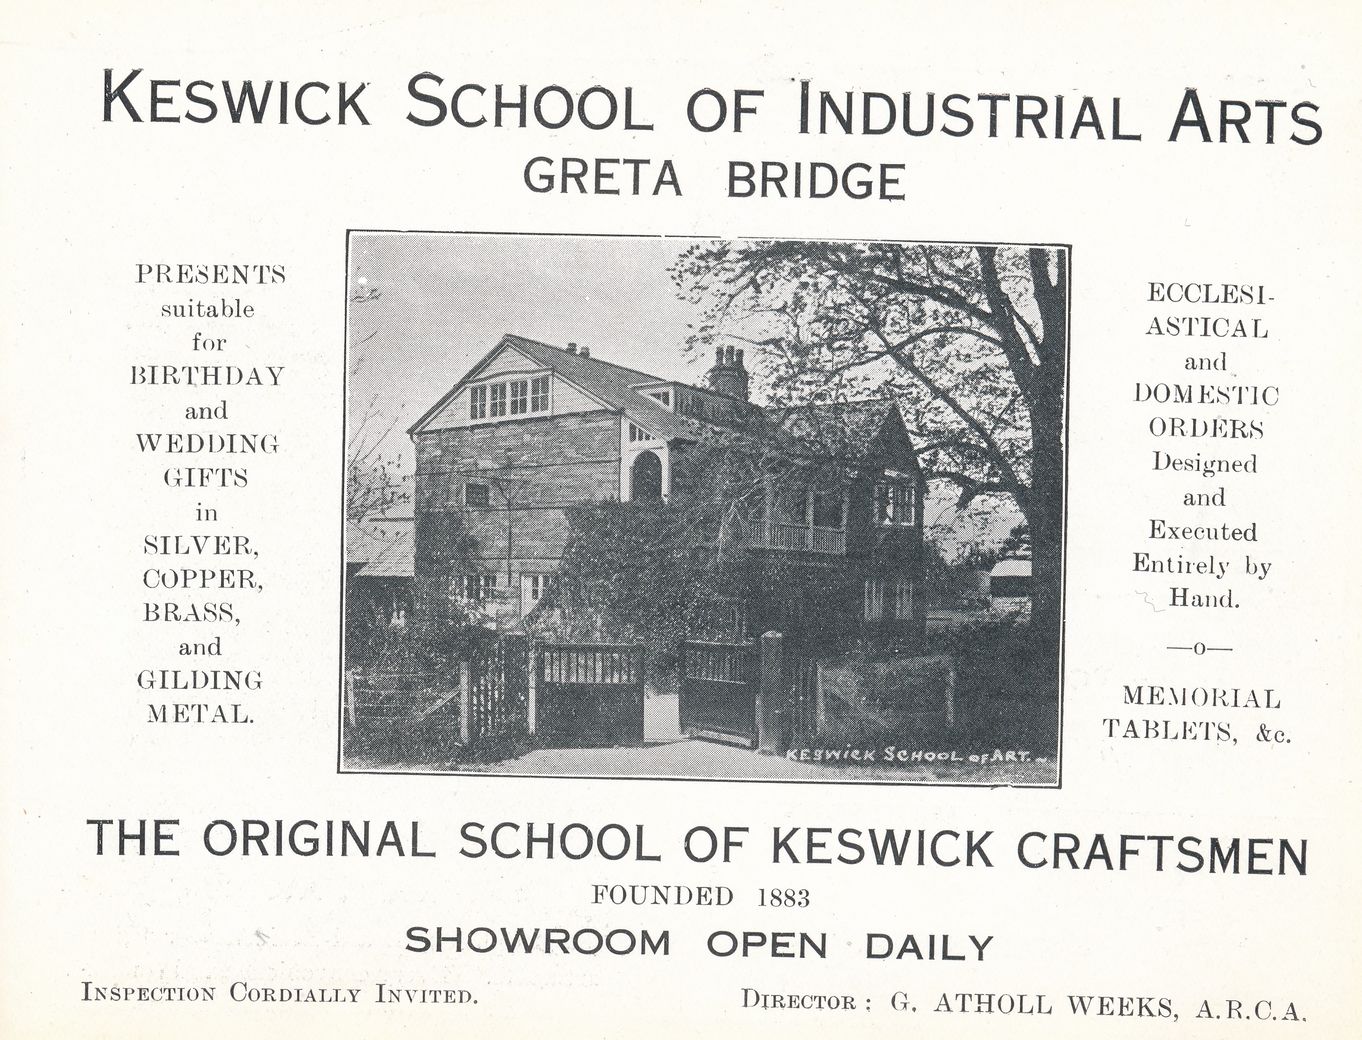 Old advert for the school of industrial arts taken from an old keswick guide